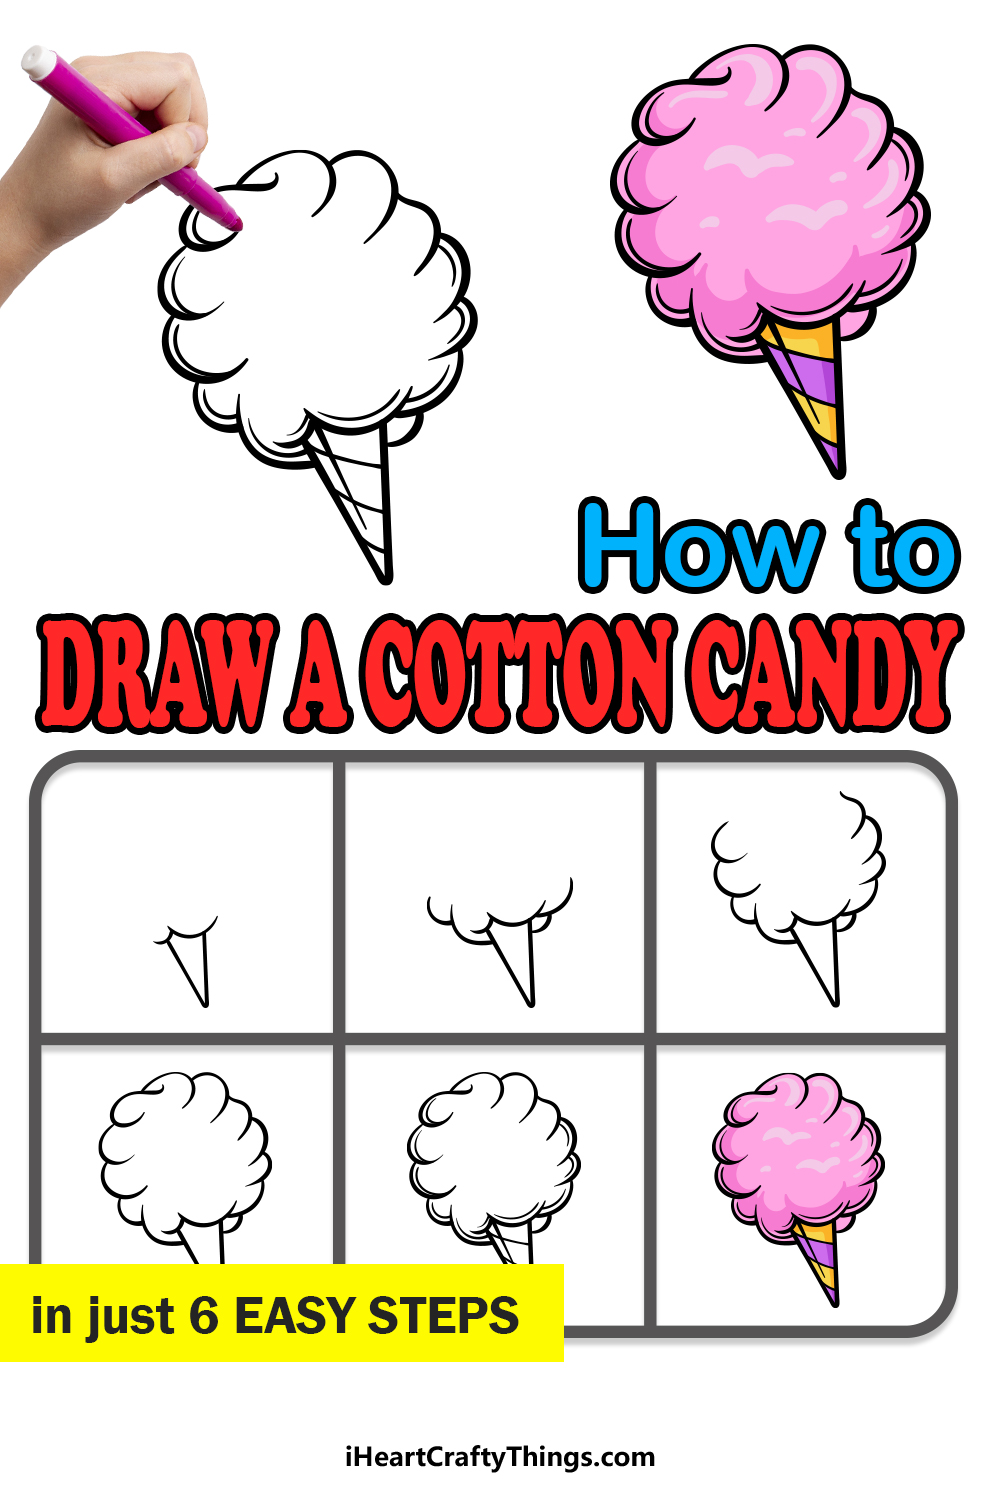 how to draw Cotton Candy in 6 easy steps